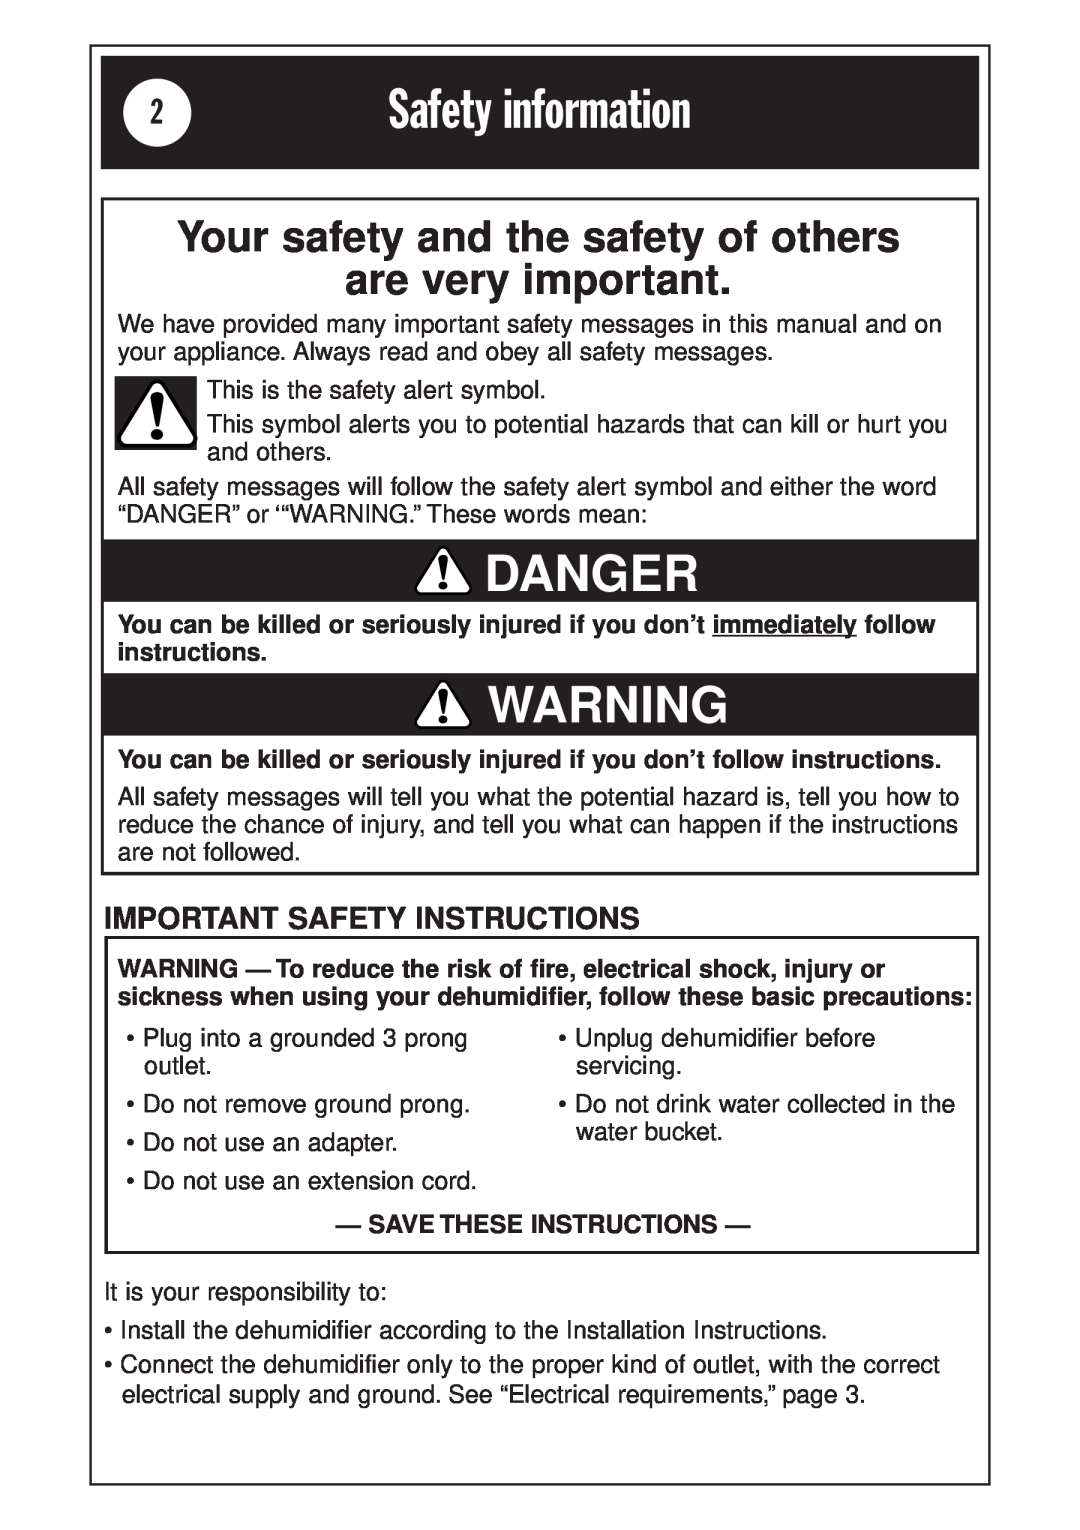 Whirlpool 1185020 manual Safety information, Your safety and the safety of others, are very important, Danger 